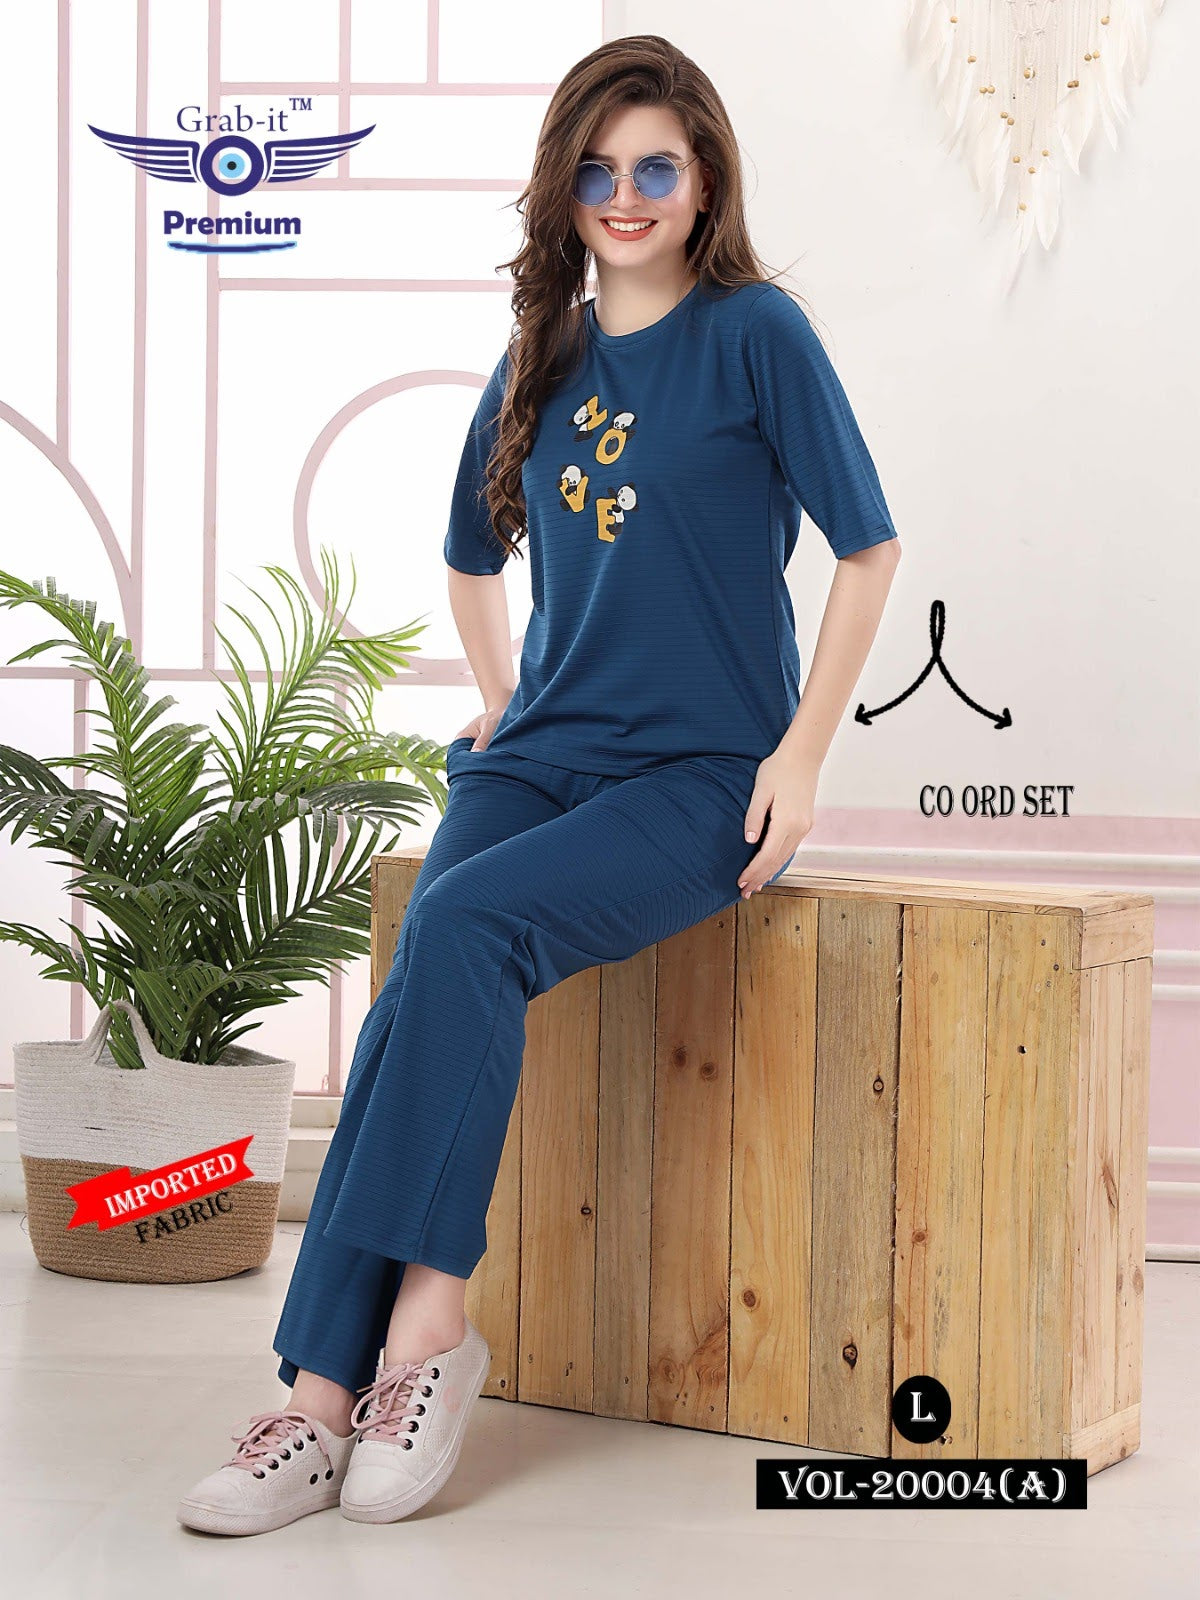 Vol 20004 Grab It Imported Co Ord Set